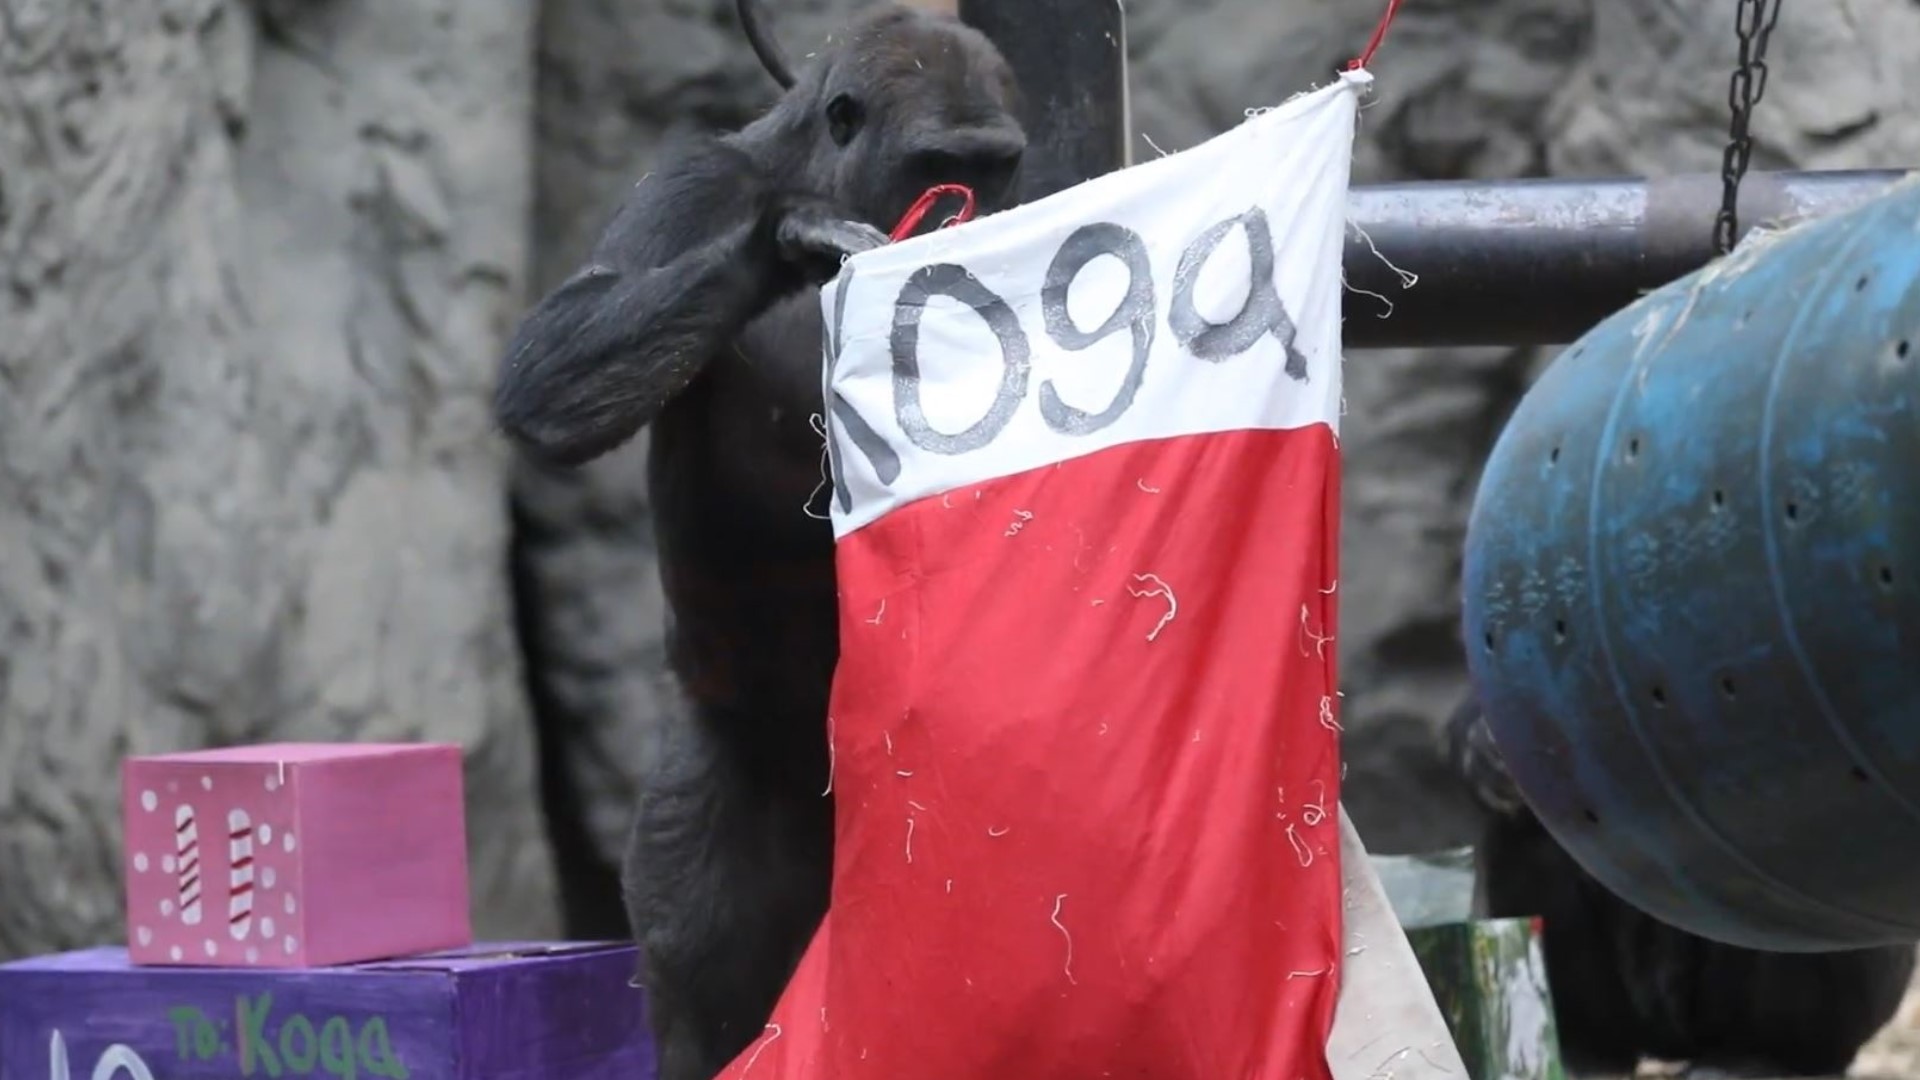 In an adorable social media post the zoo shared a video of their gorilla troop opening gifts on Christmas day.